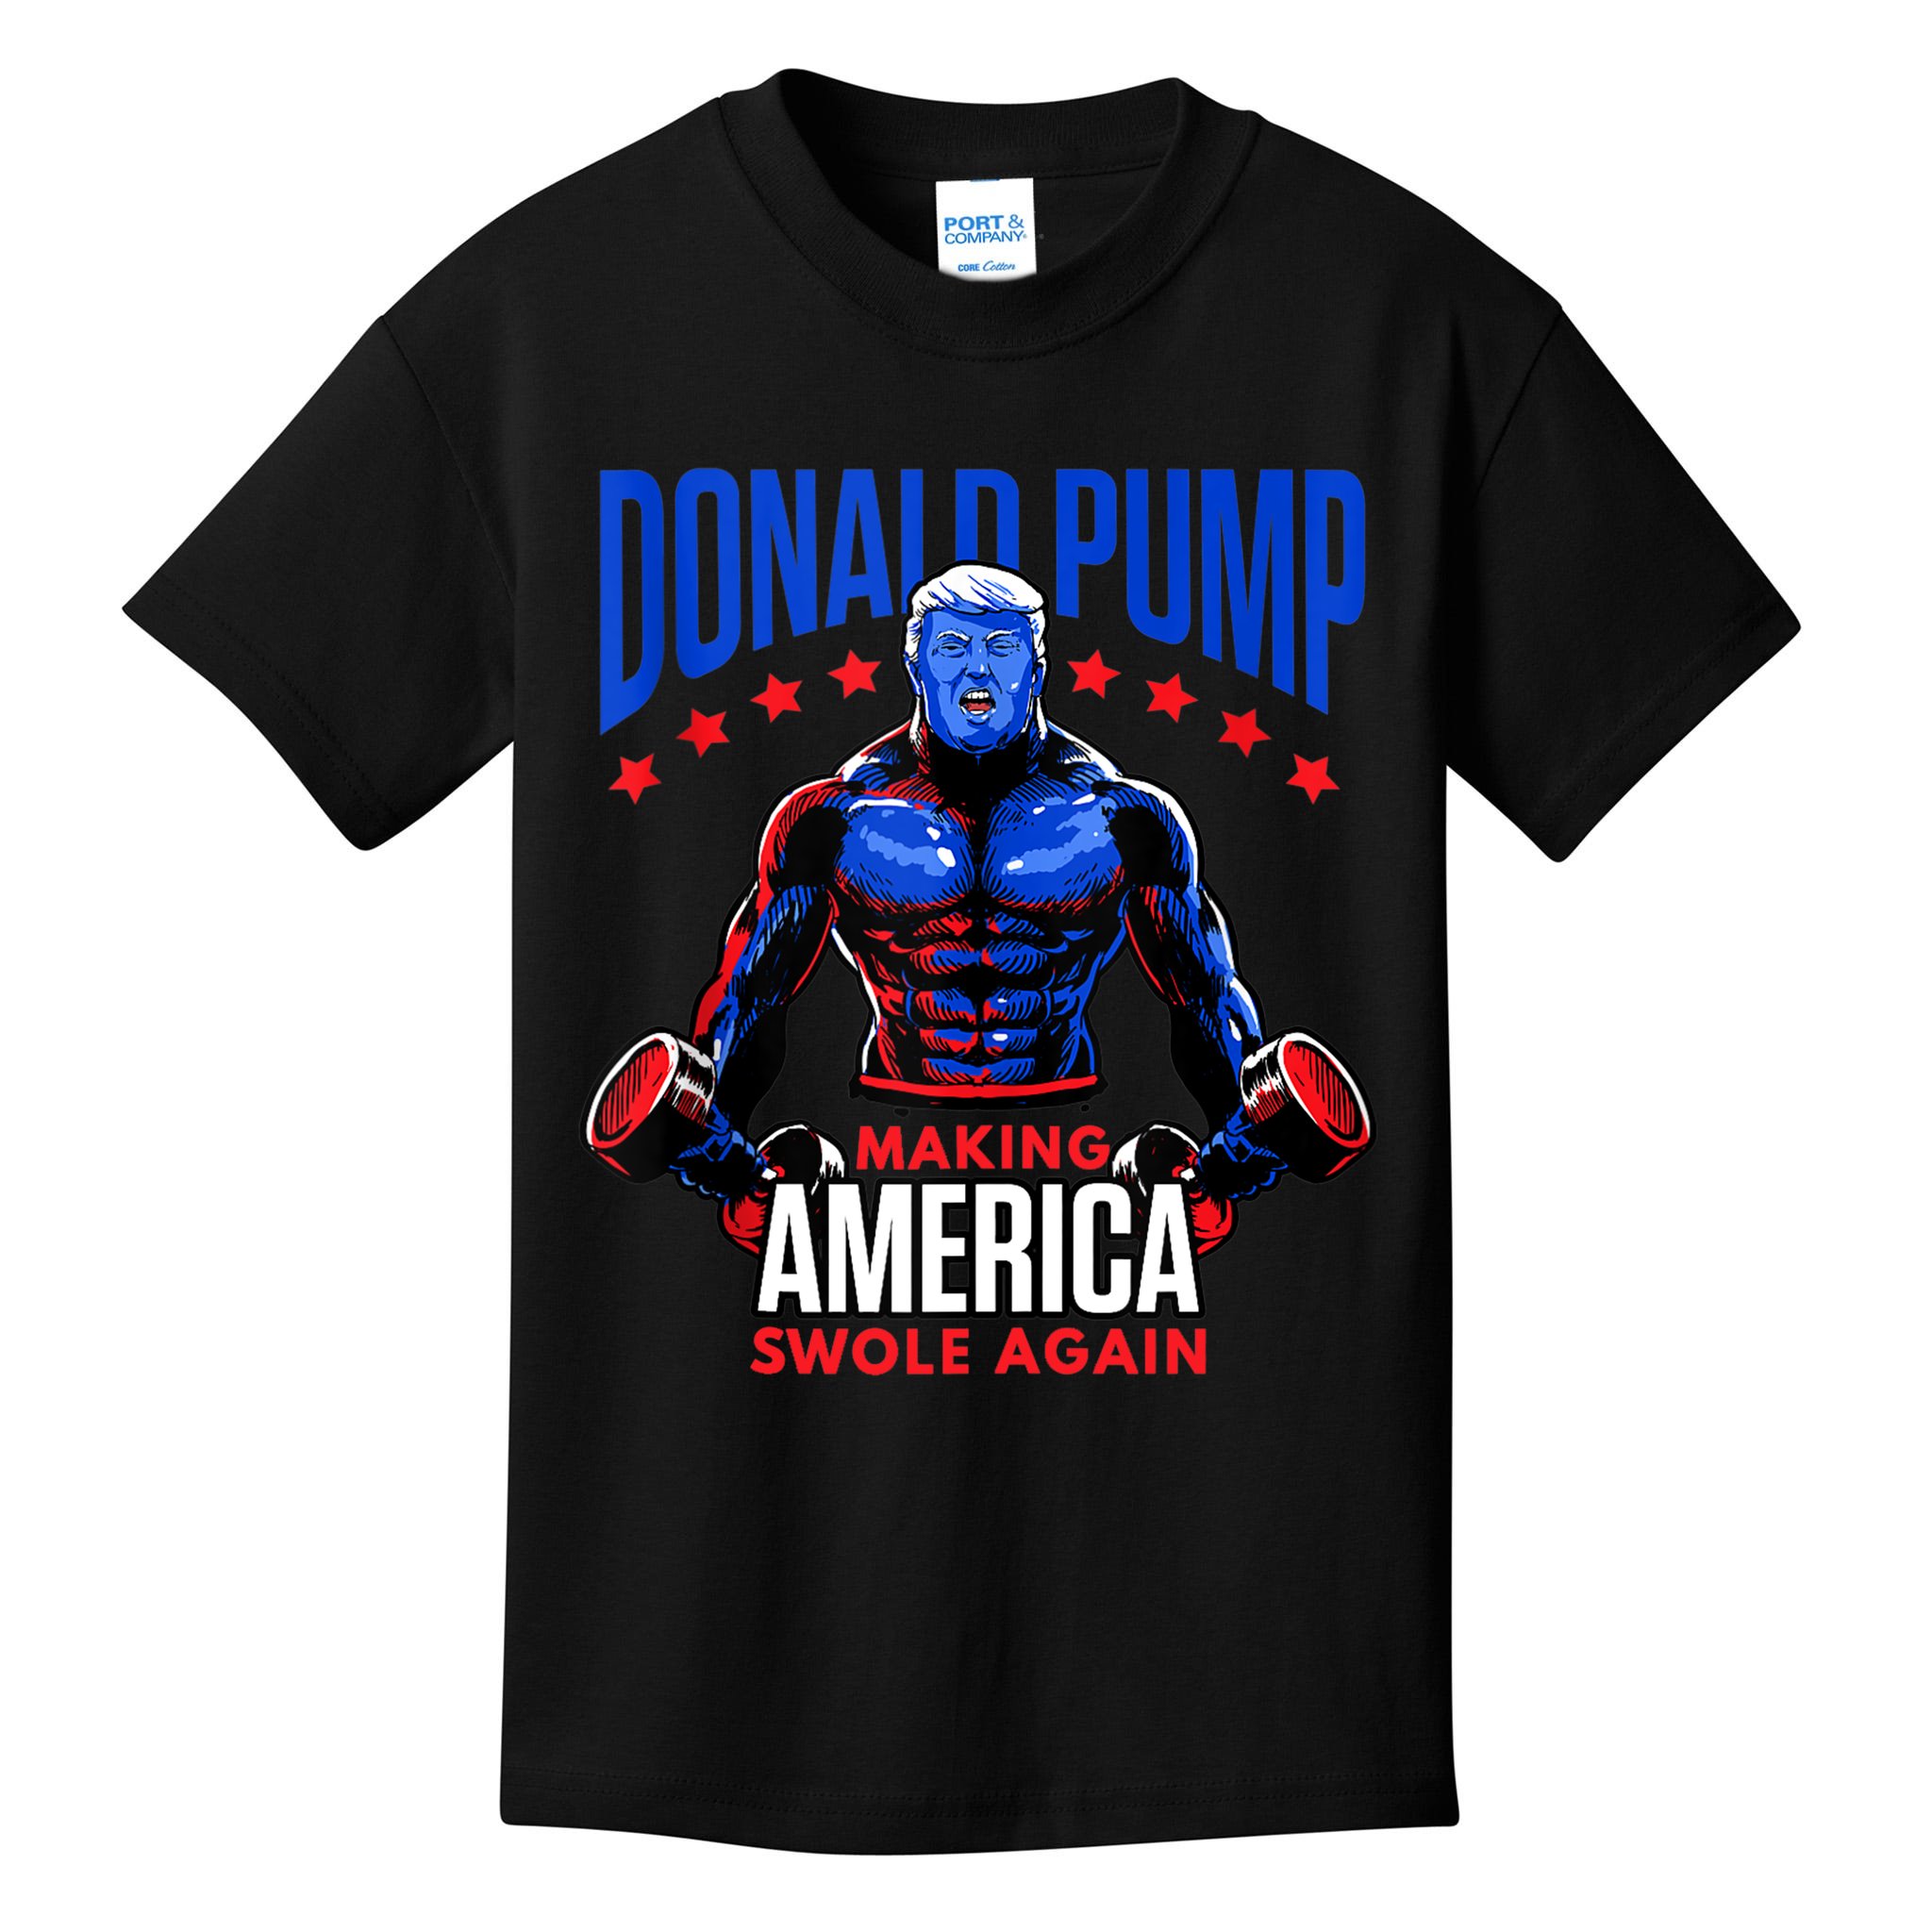 https://images3.teeshirtpalace.com/images/productImages/dps8242815-donald-pump-swole-america-gift-trump-weight-lifting-gym-fitness--black-yt-garment.jpg